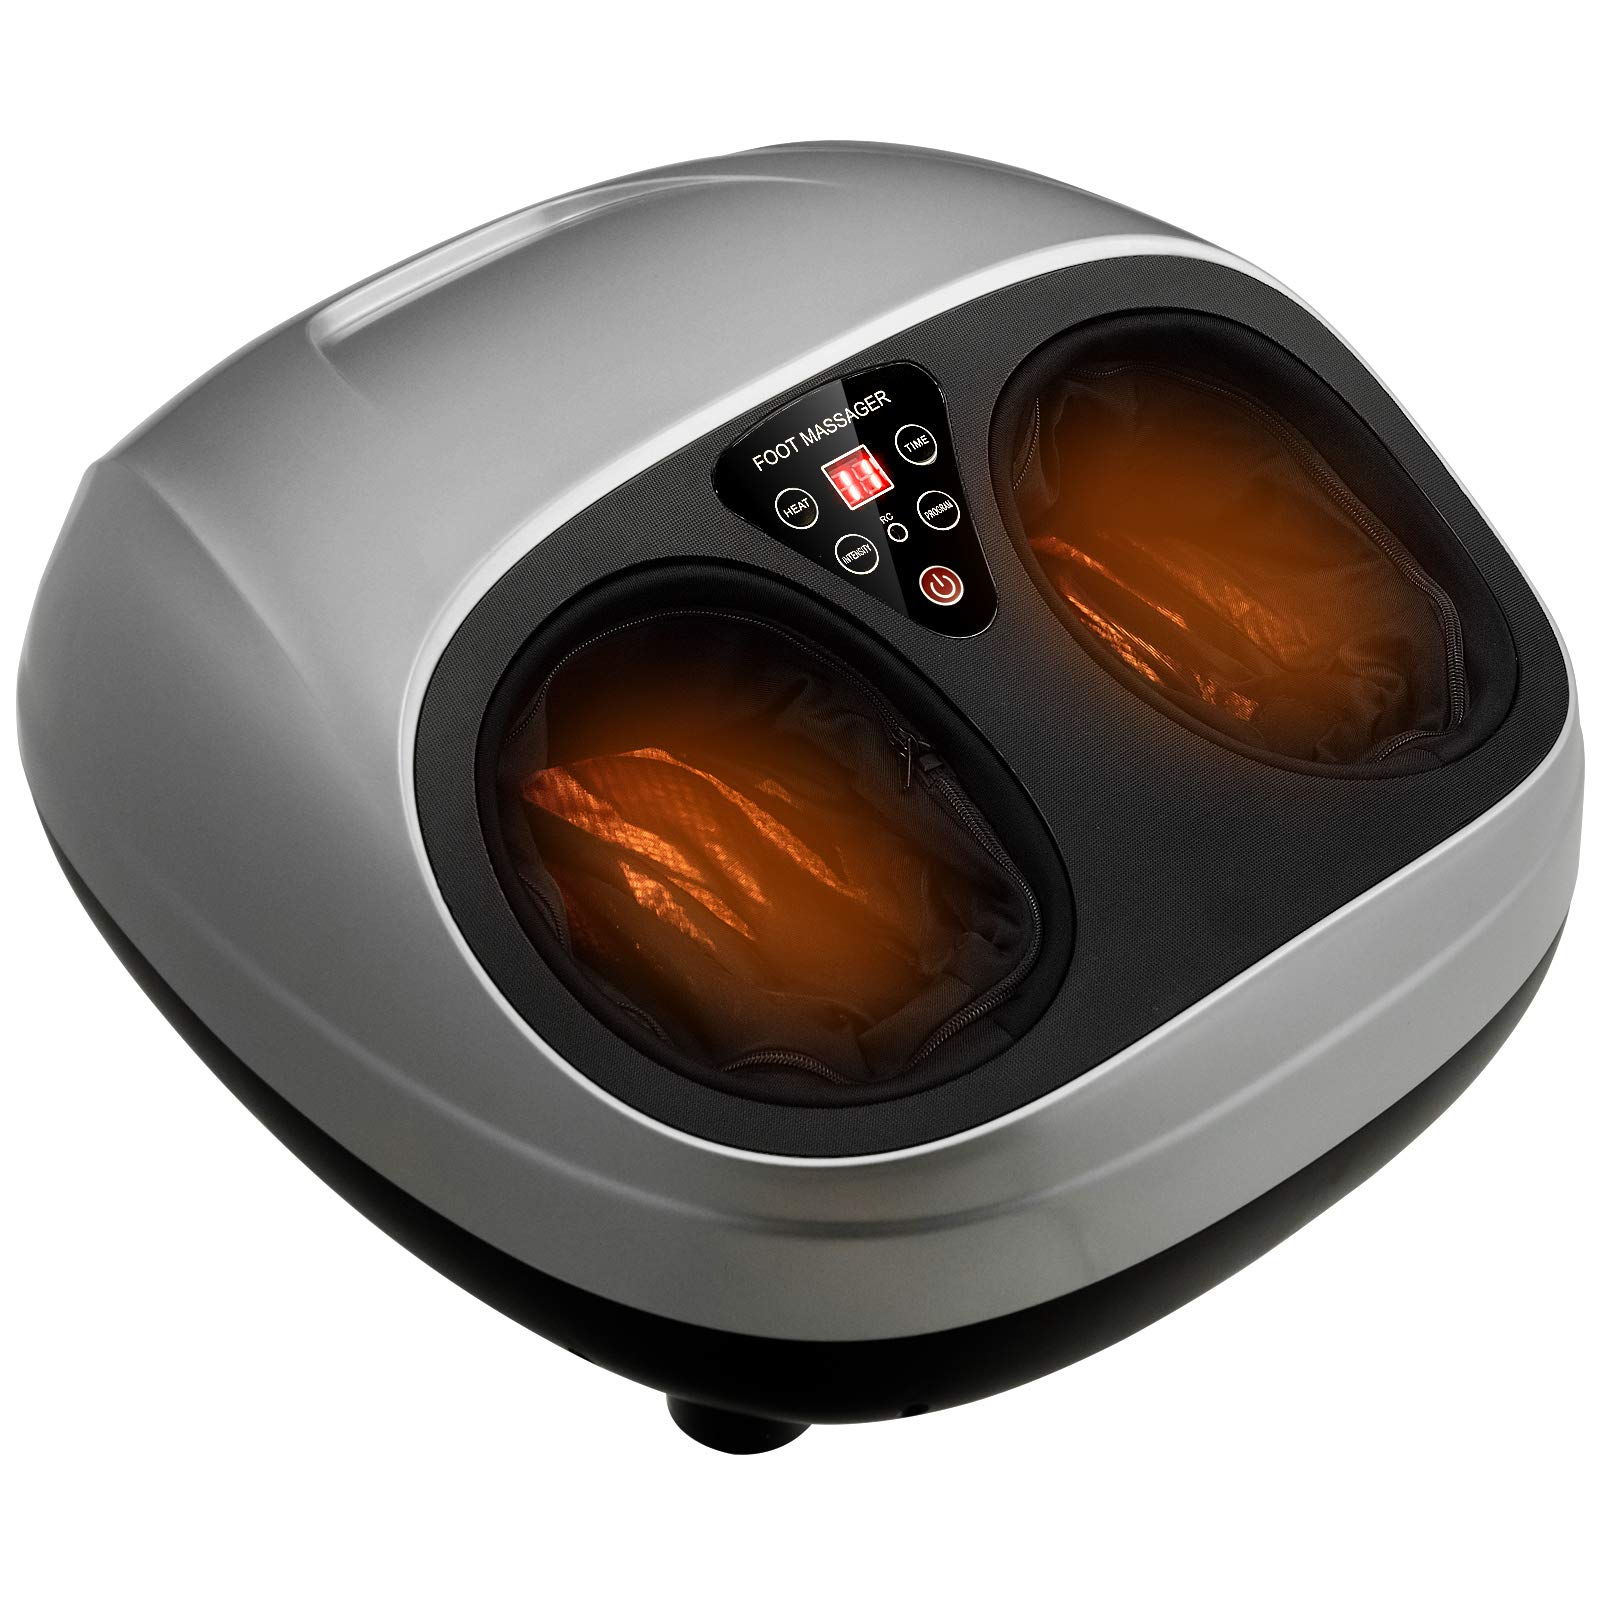 Giantex Foot Massager Machine with Heat and Remote